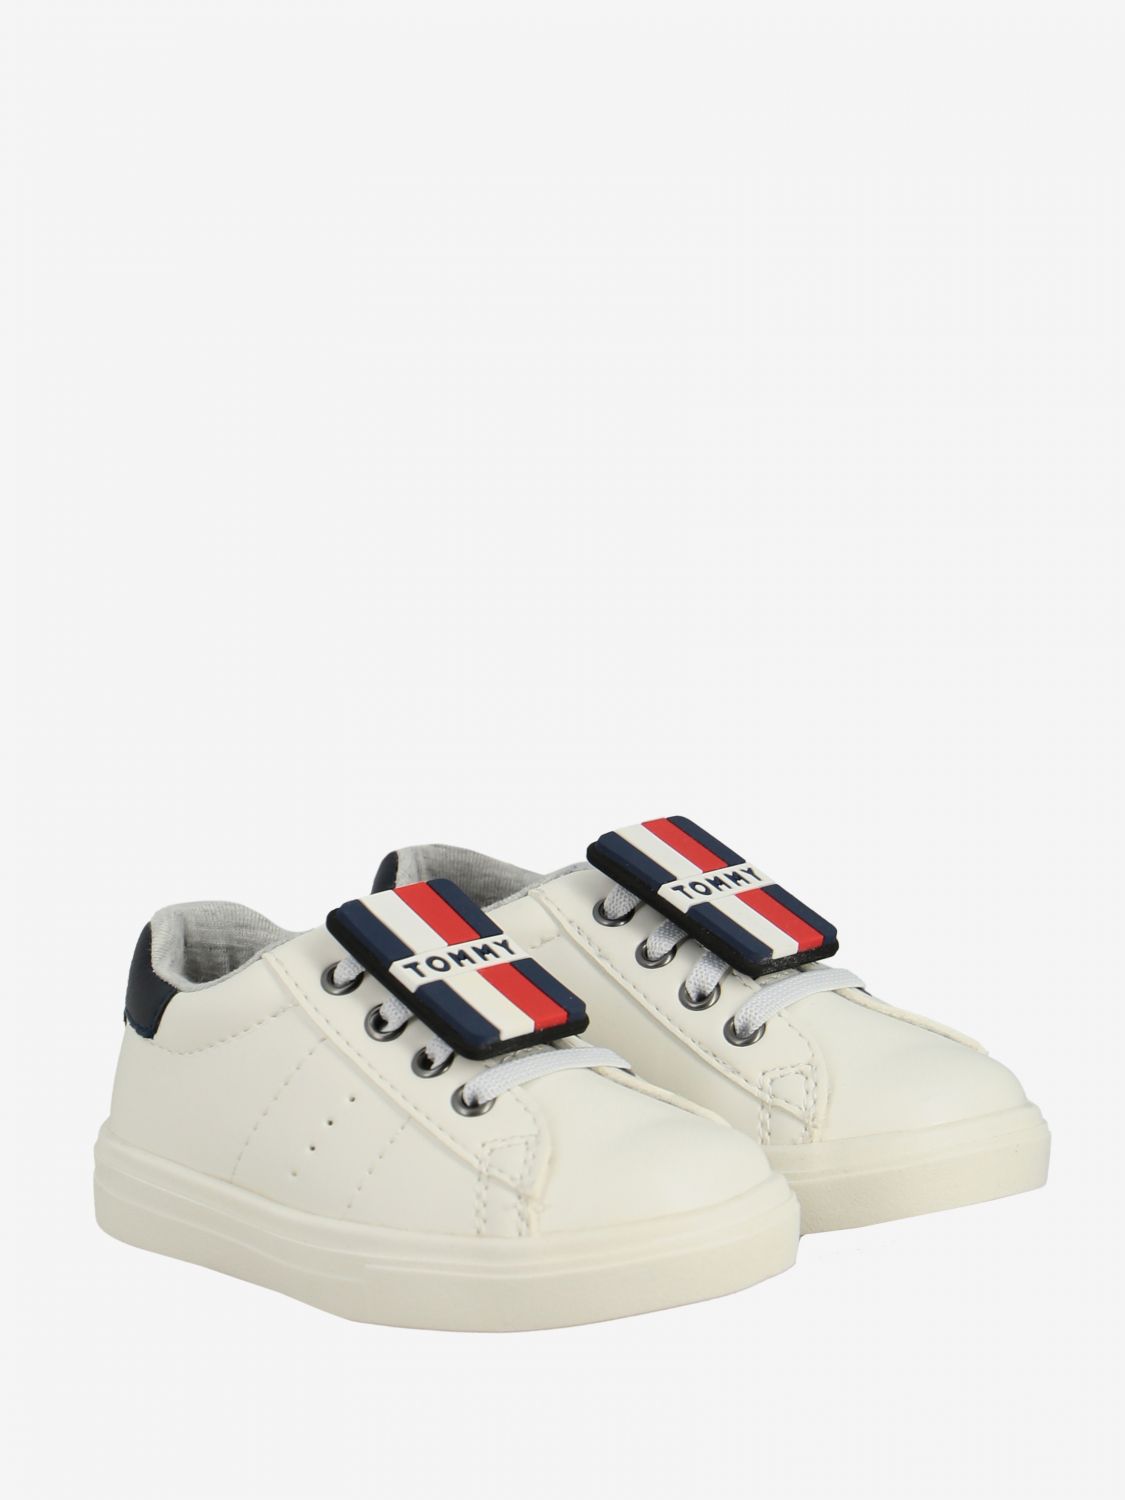 Chaussure Bebe Tommy Hilfiger New Daily Offers Kilicdalgiclik Com Tr